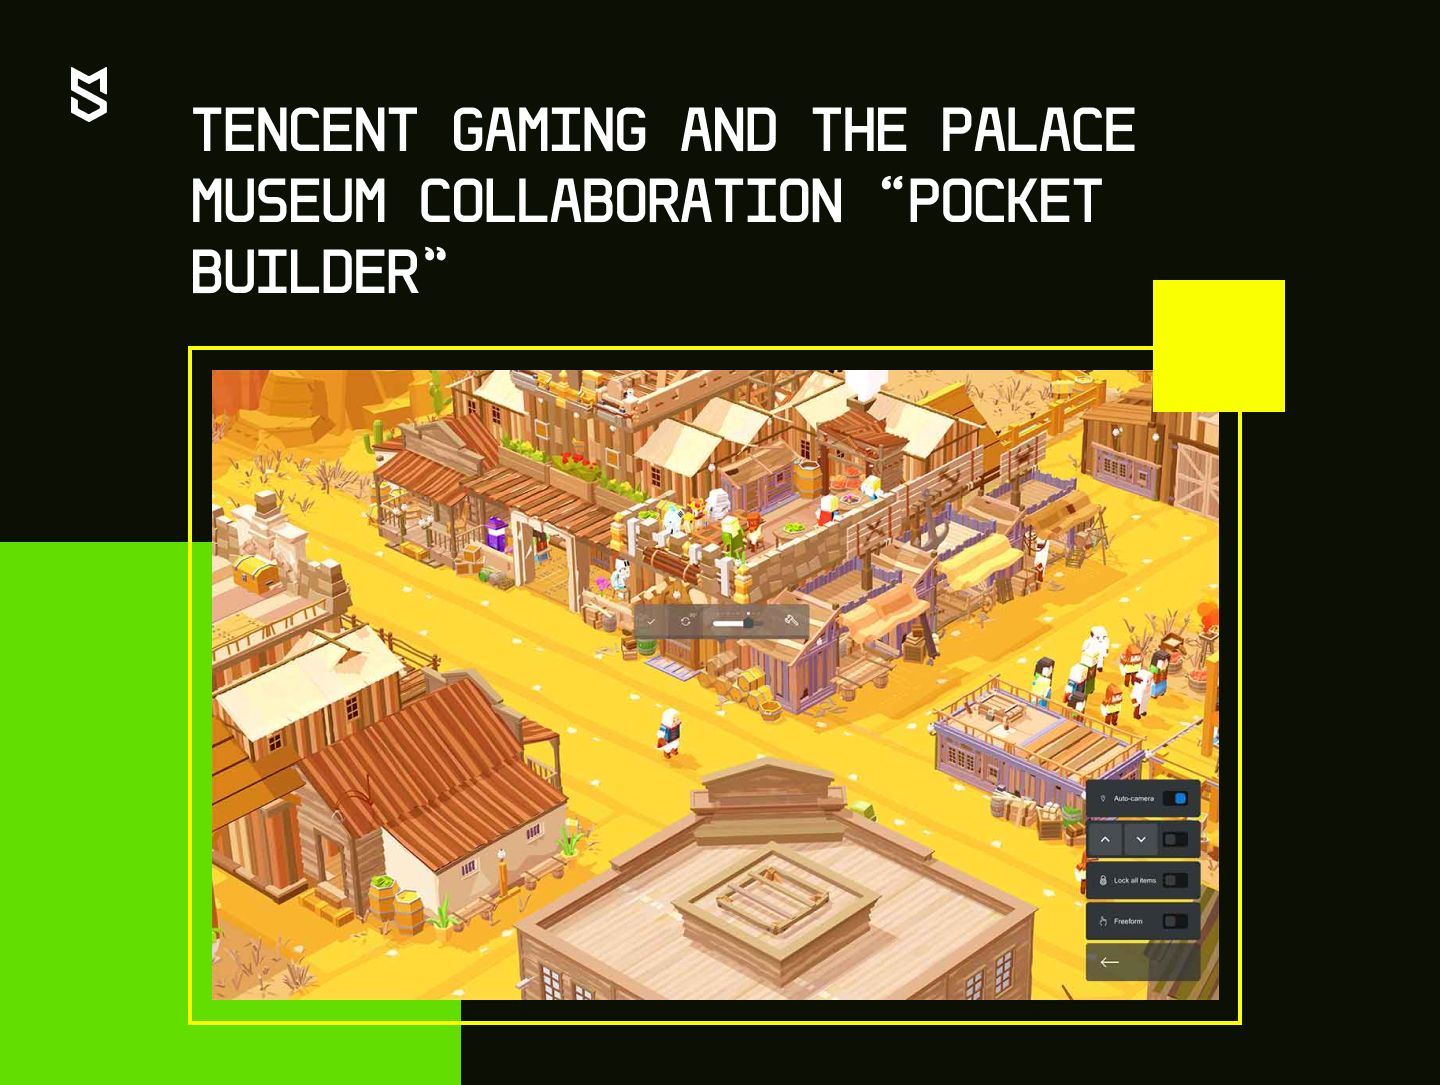 Tencent Gaming and the Palace Museum collaboration “Pocket Builder”